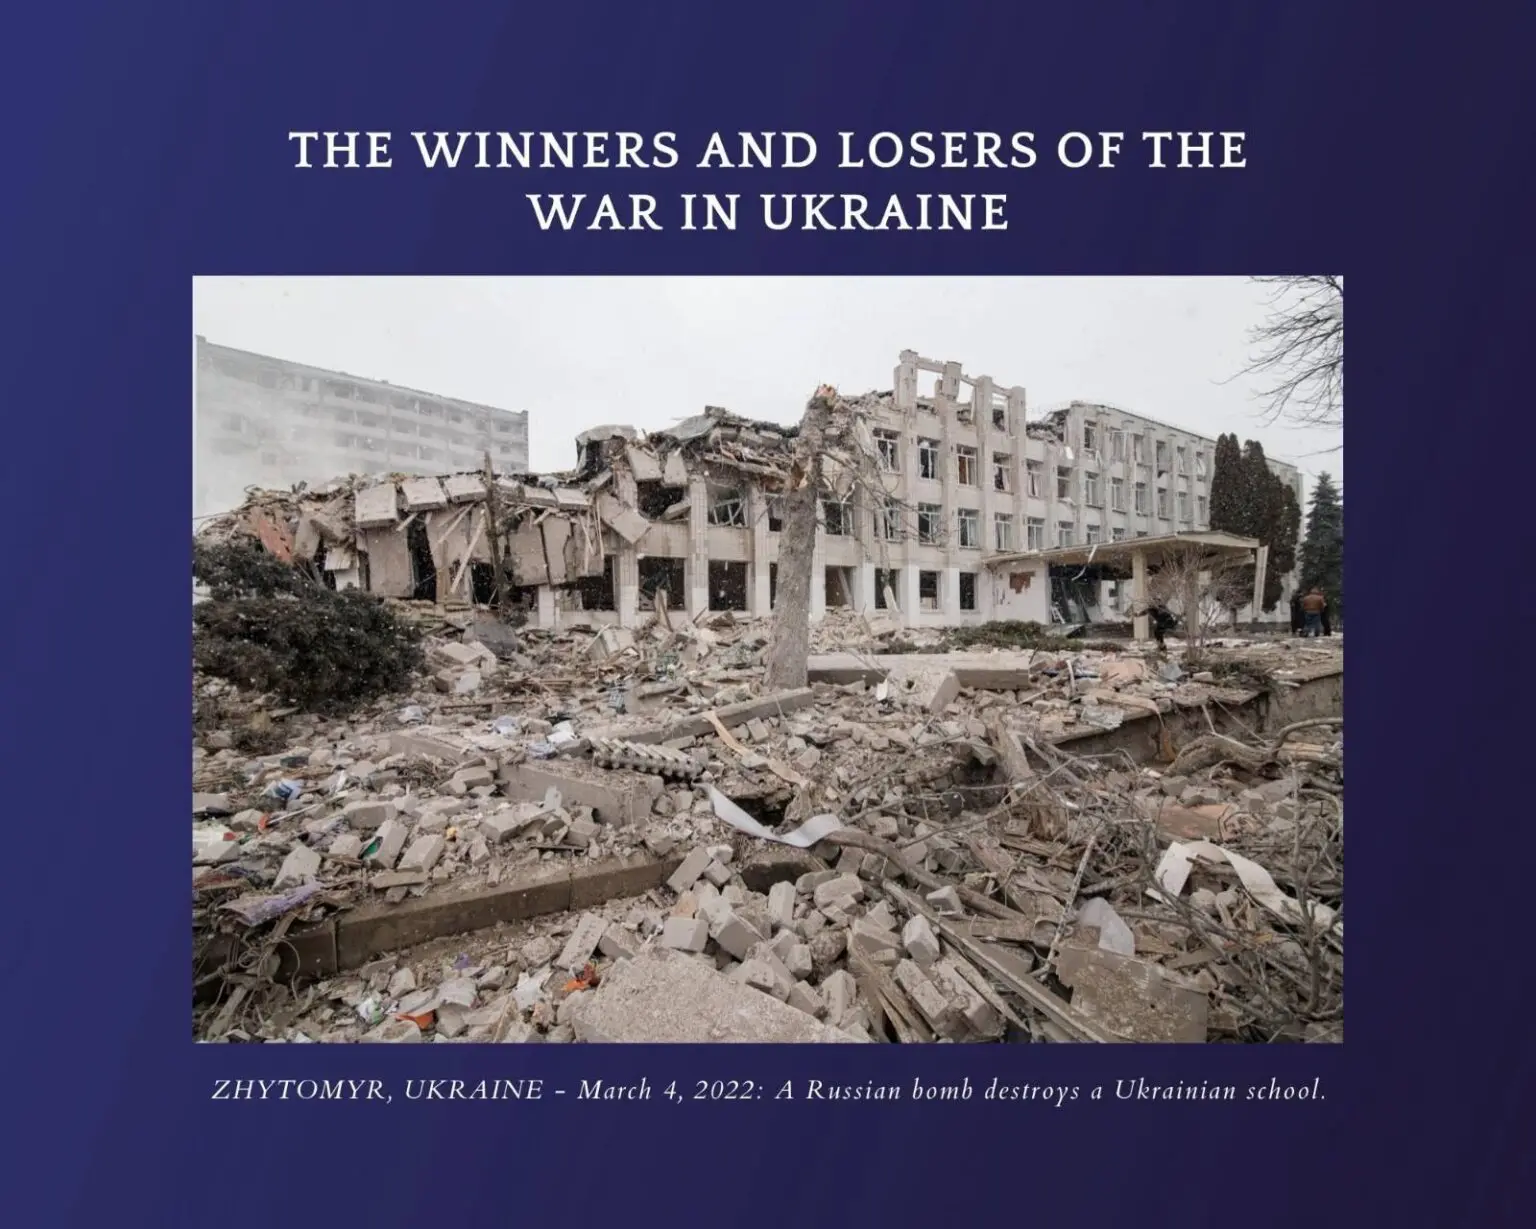 The winners and losers of the War in Ukraine